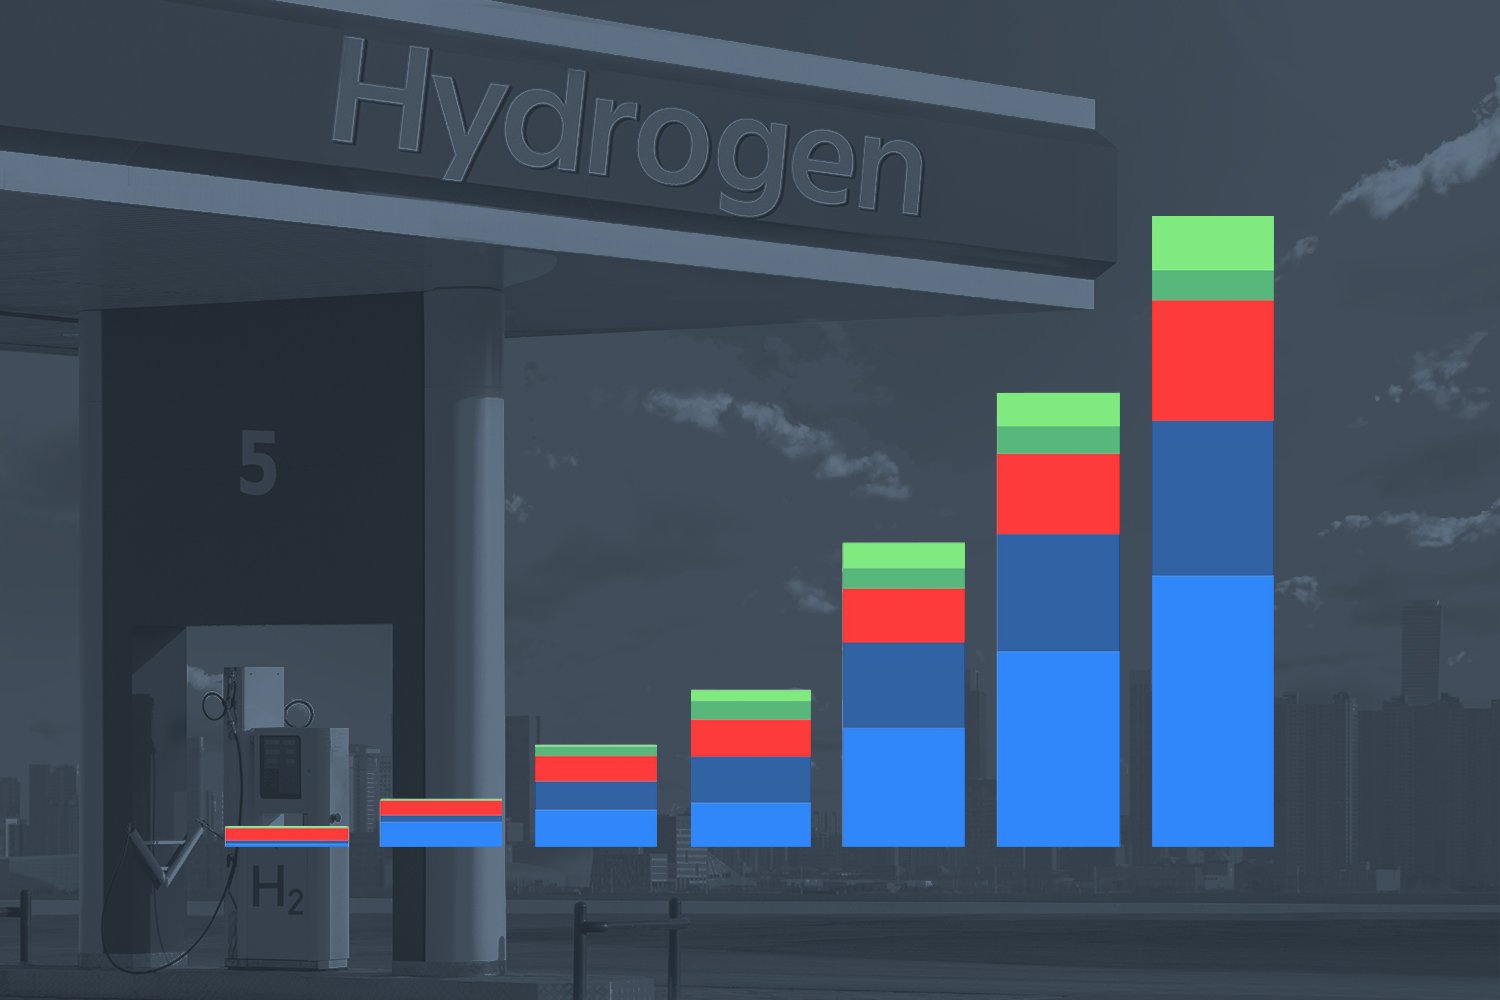 An illustration of a bar chart imposed over a hydrogen fuel station